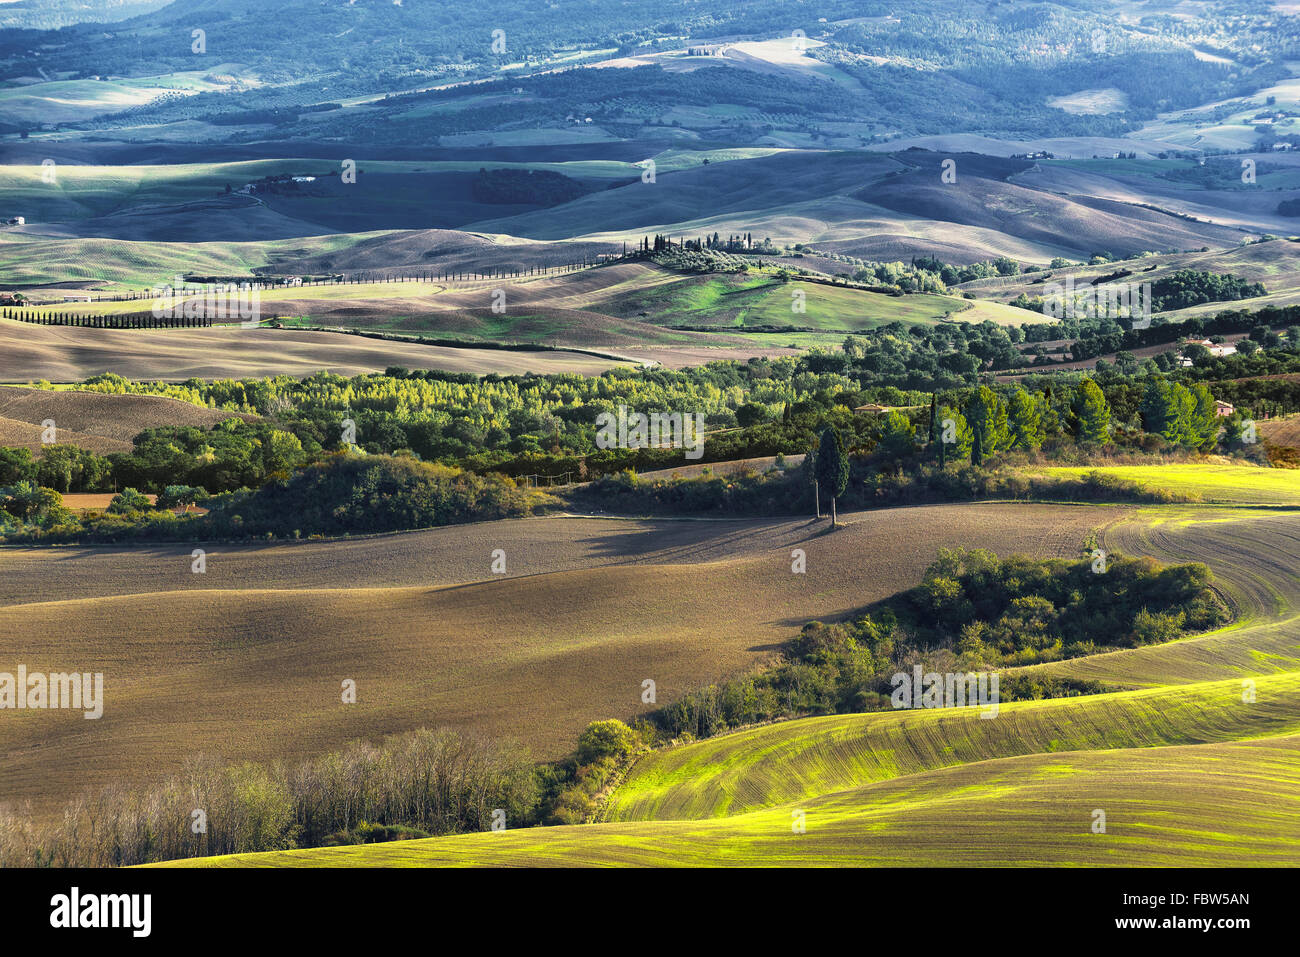 Plowed fields in the picturesque landscape of Italy. Tuscany landscape. Stock Photo